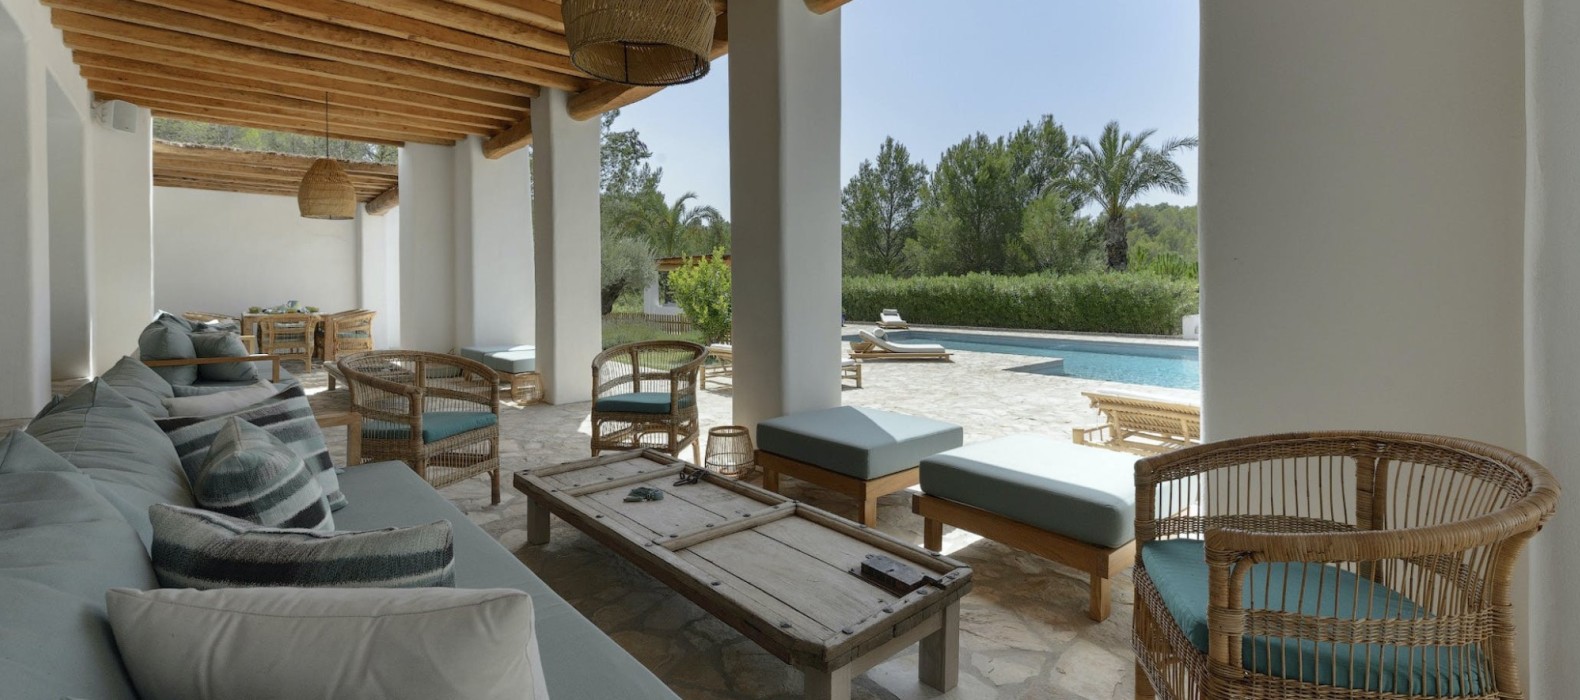 Exterior seating area with pool view of Villa Blissful in Ibiza